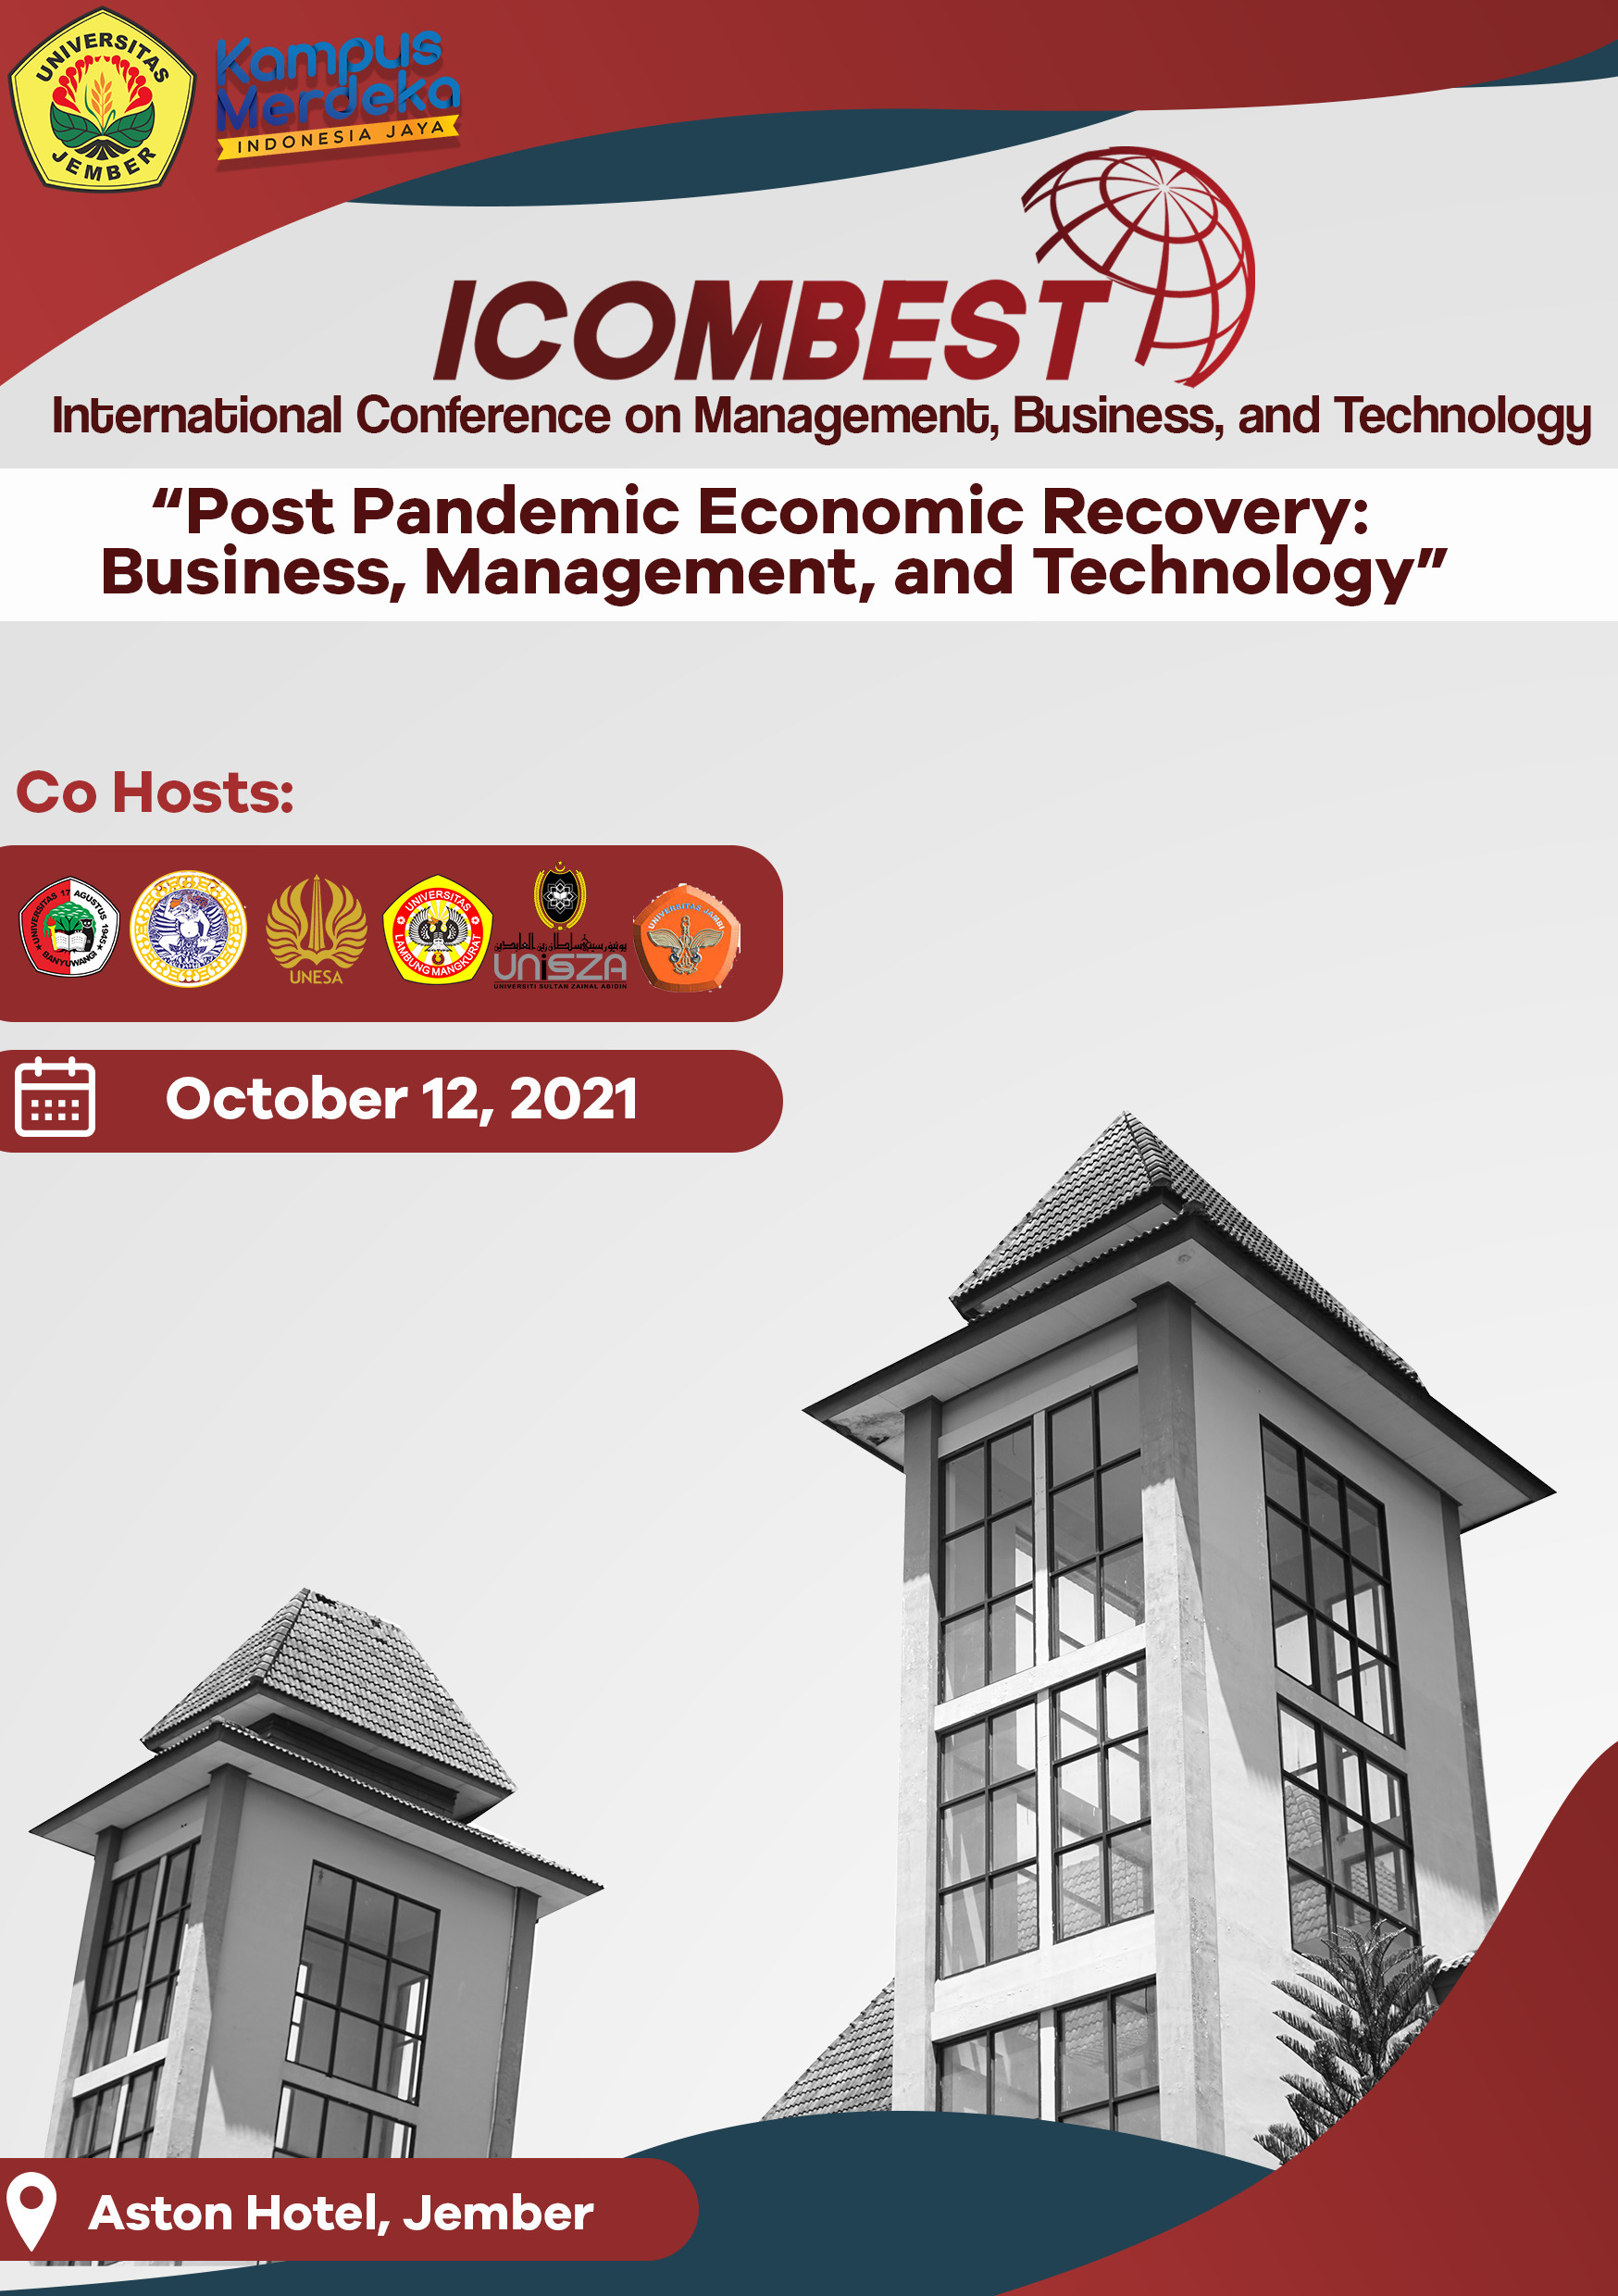  International Conference on Management, Business, and Technology (ICOMBEST) 2021